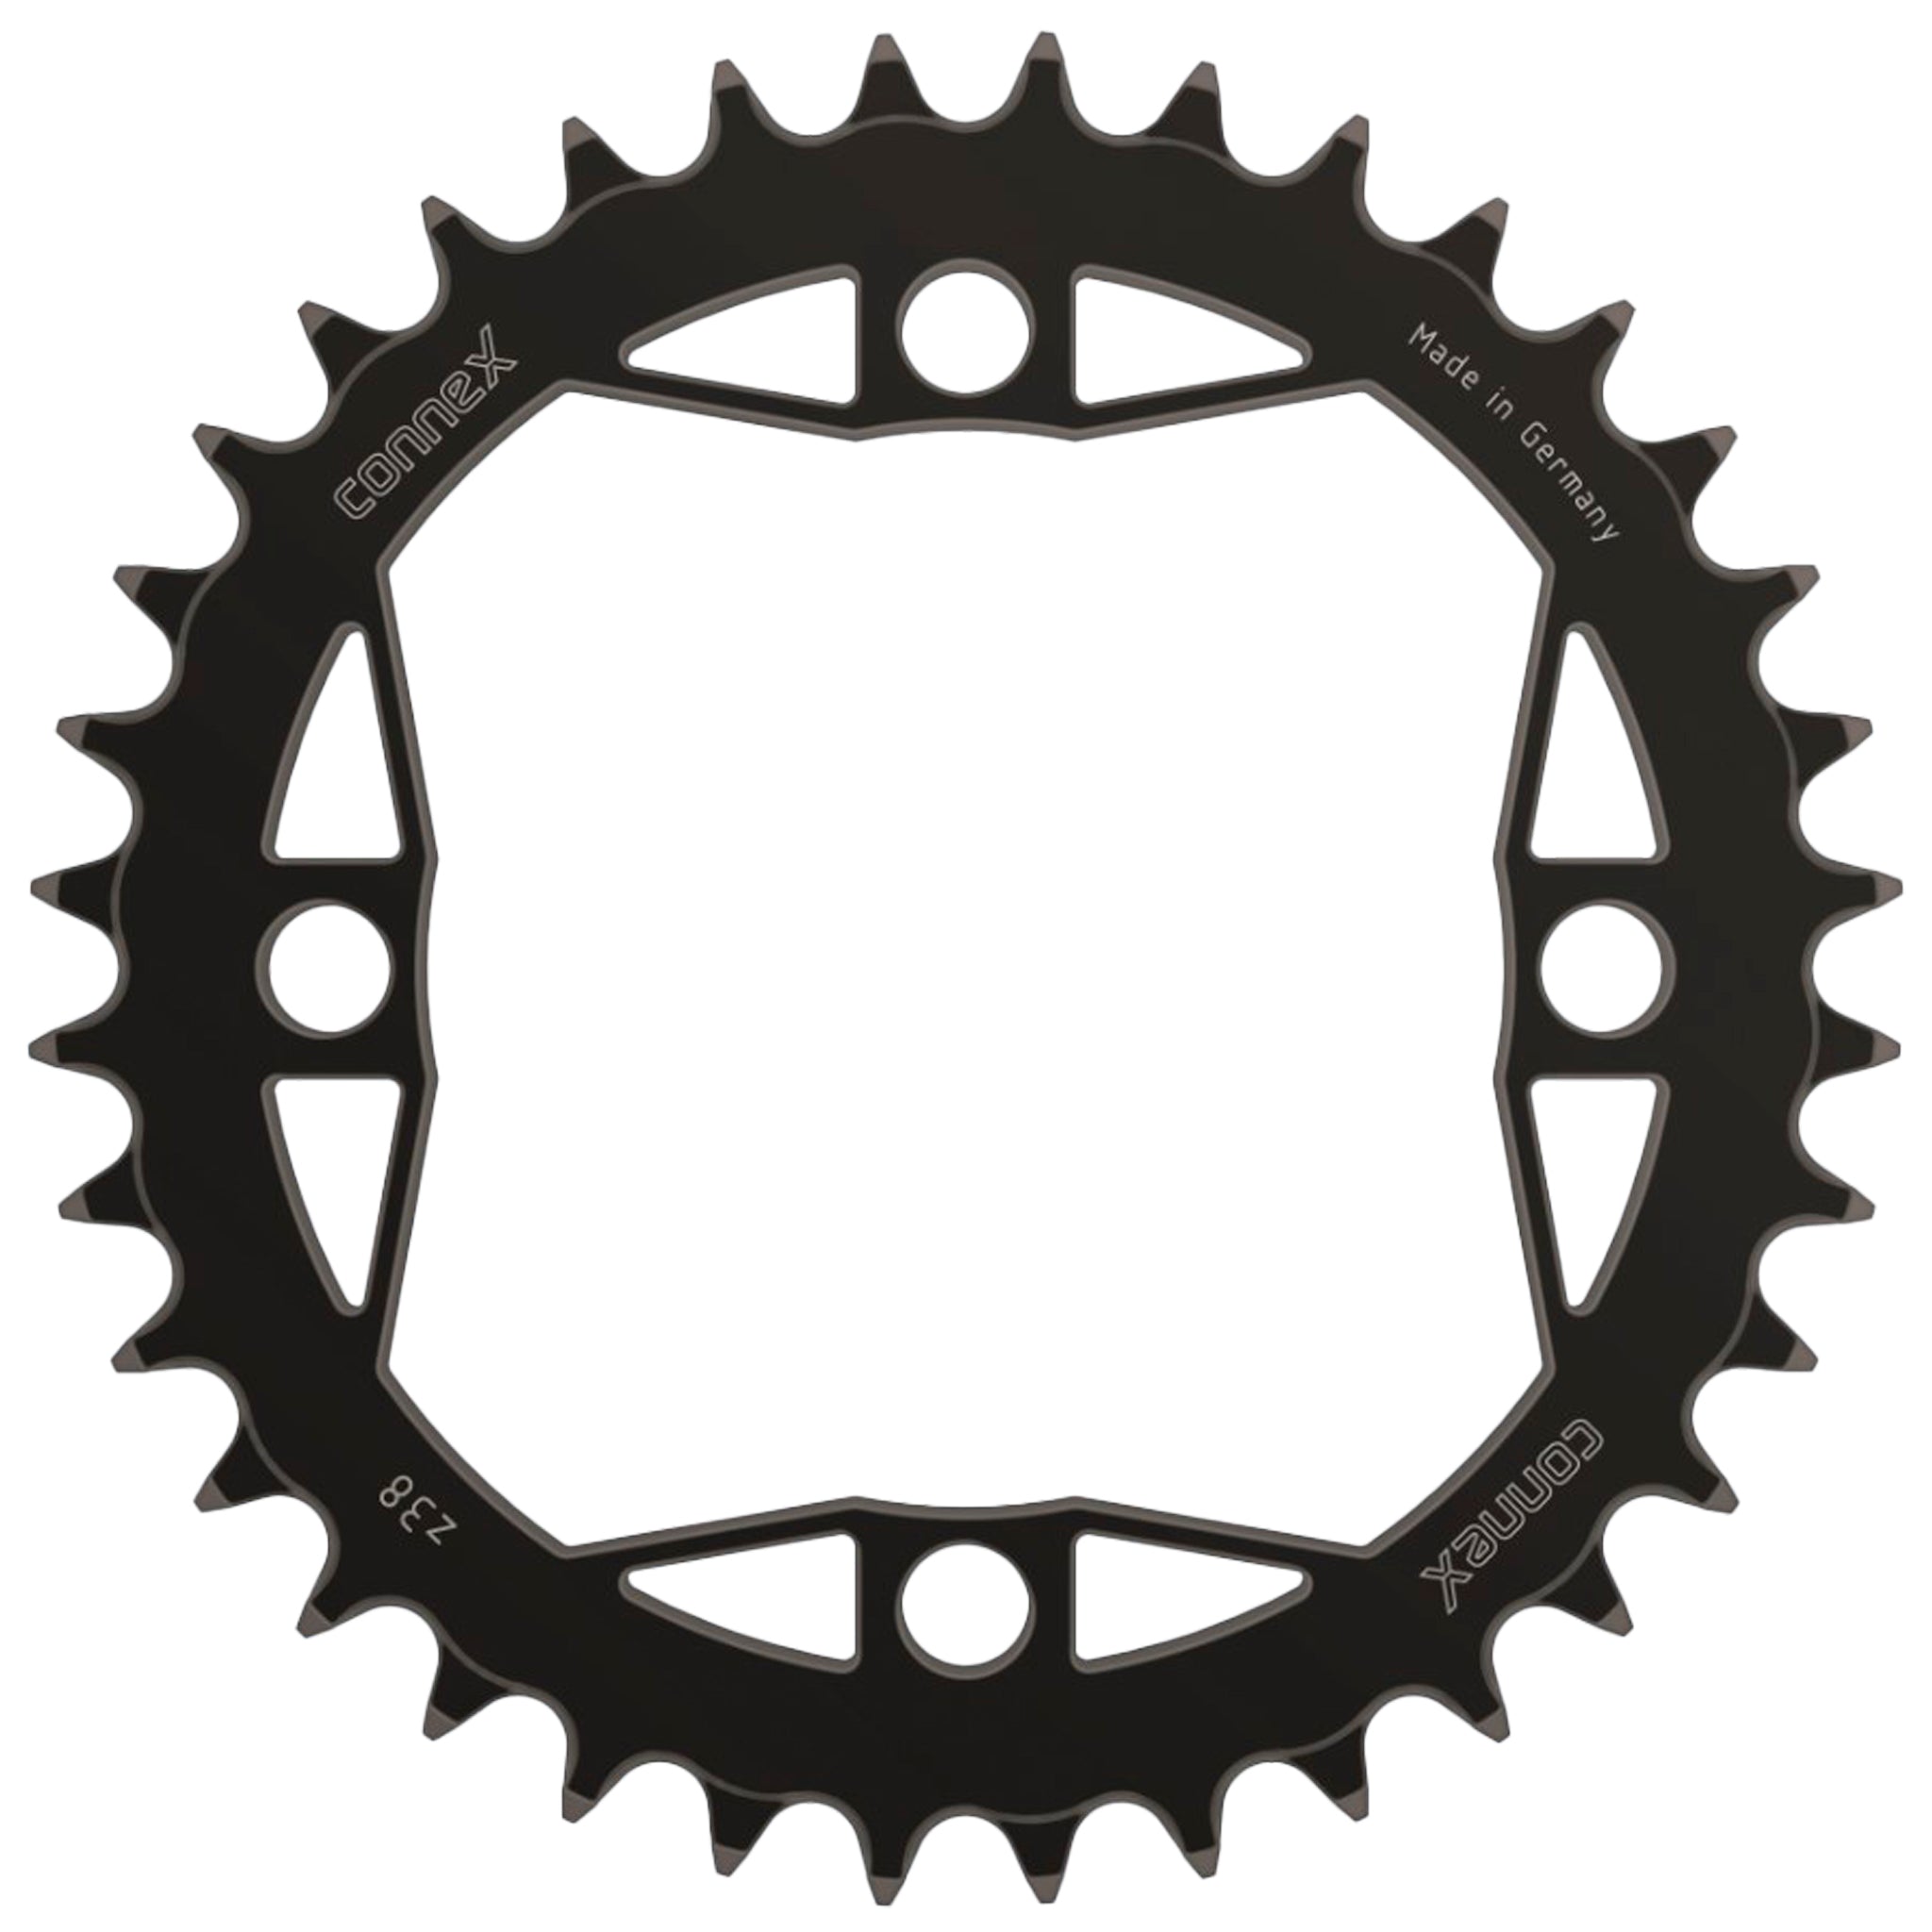 Connex Steel 1x Narrow Wide Chainring 34T 104 BCD